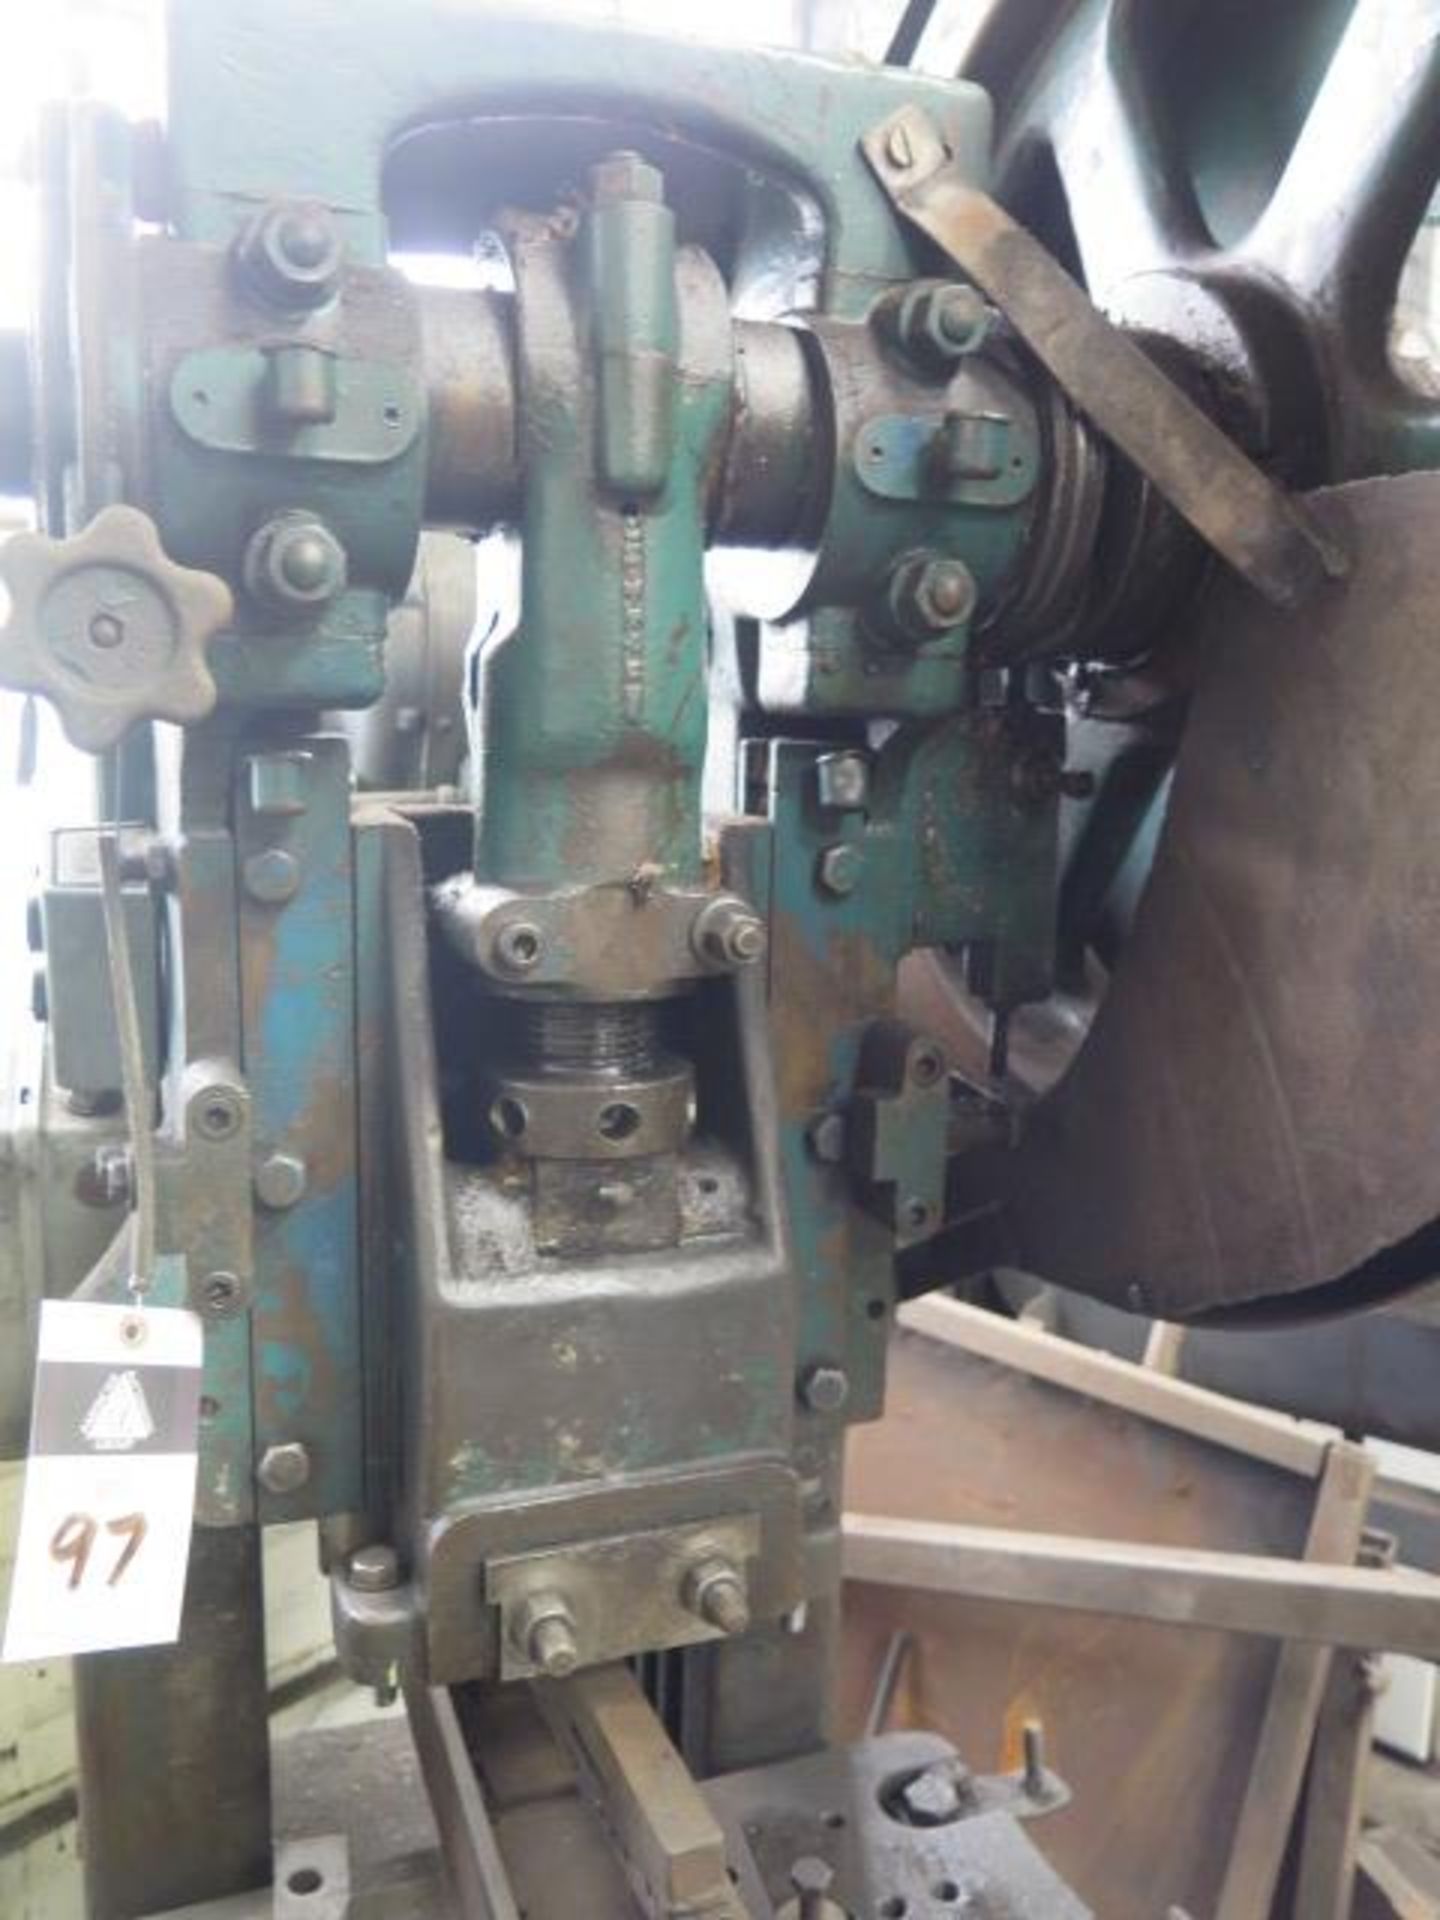 Perkins mdl.351B 20-Ton OBI Stamping Press (FOR PARTS ONLY) (SOLD AS-IS - NO WARRANTY) - Image 3 of 5